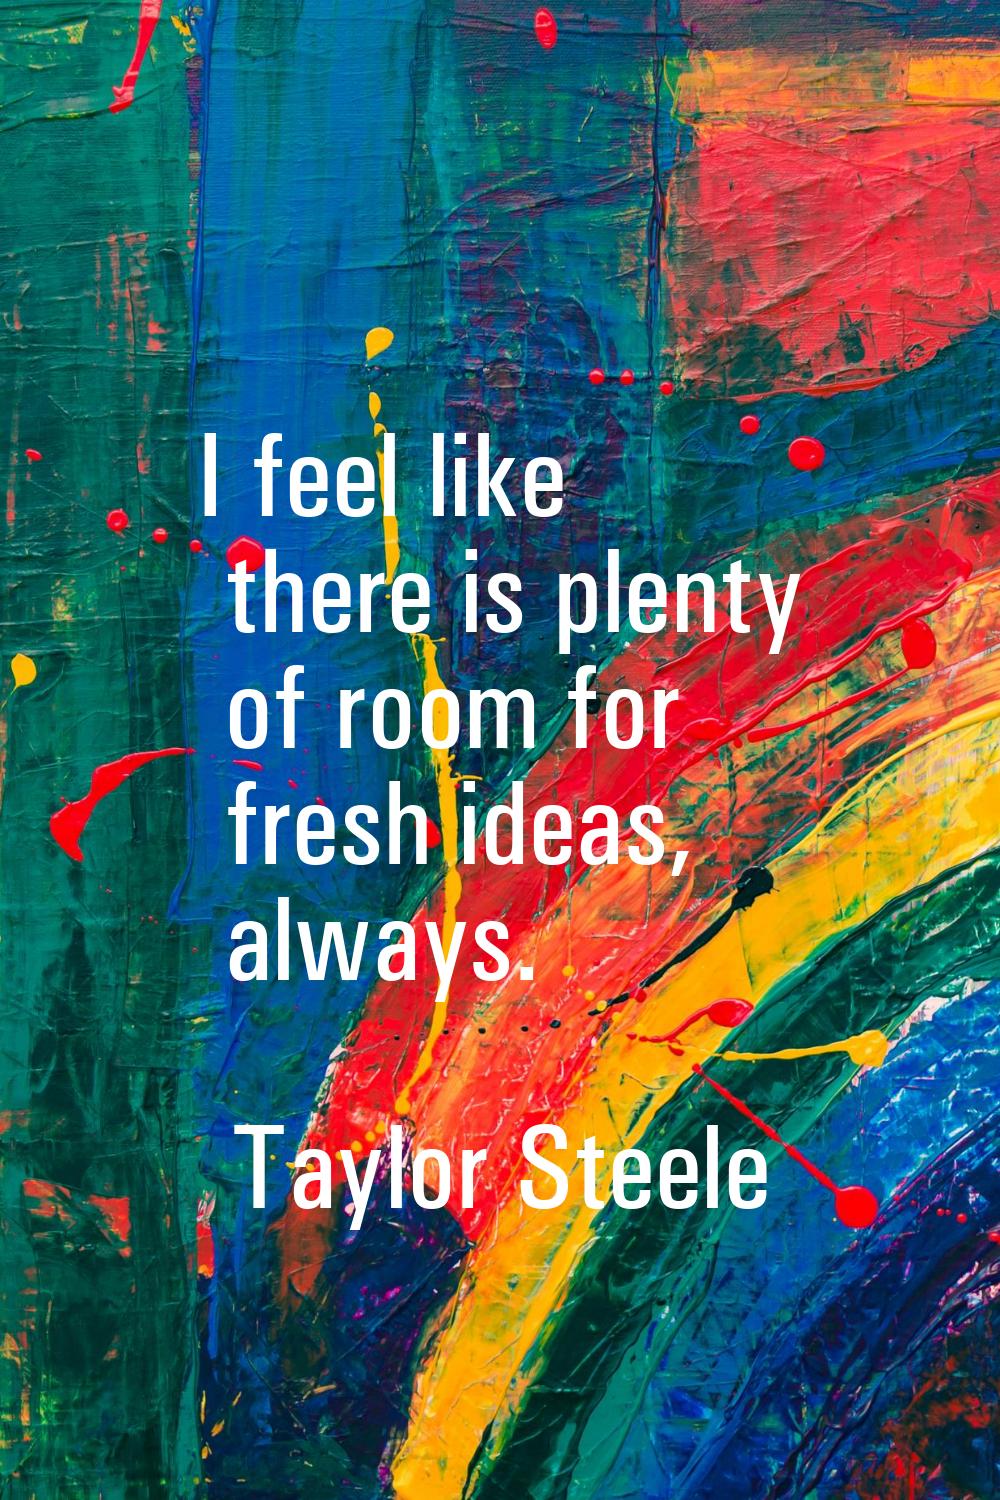 I feel like there is plenty of room for fresh ideas, always.